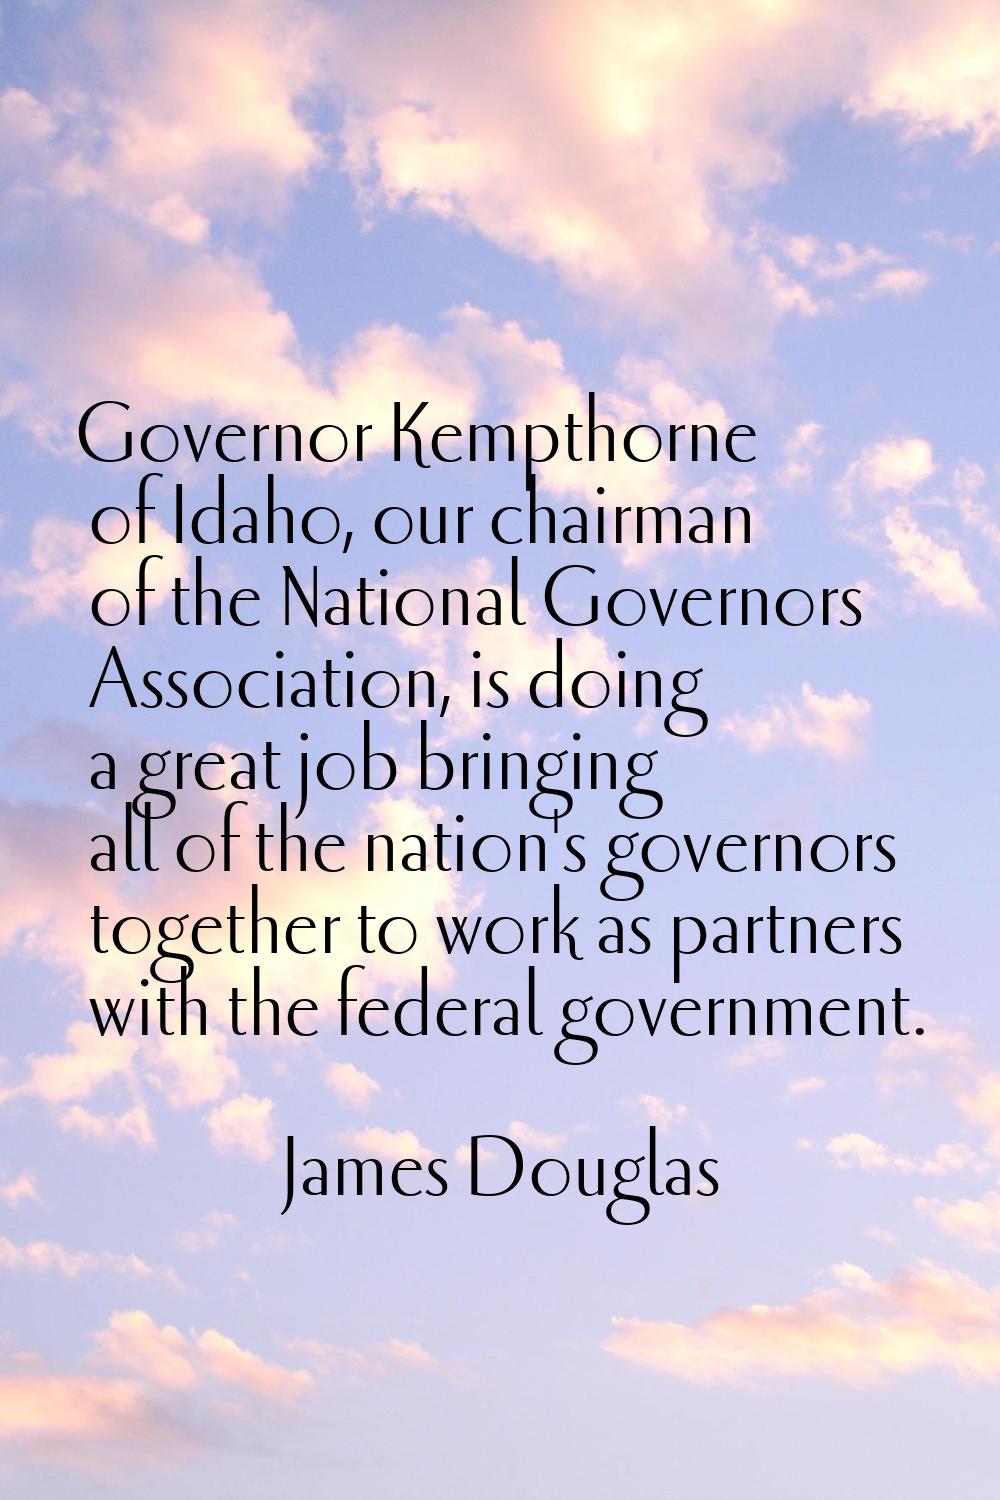 Governor Kempthorne of Idaho, our chairman of the National Governors Association, is doing a great 